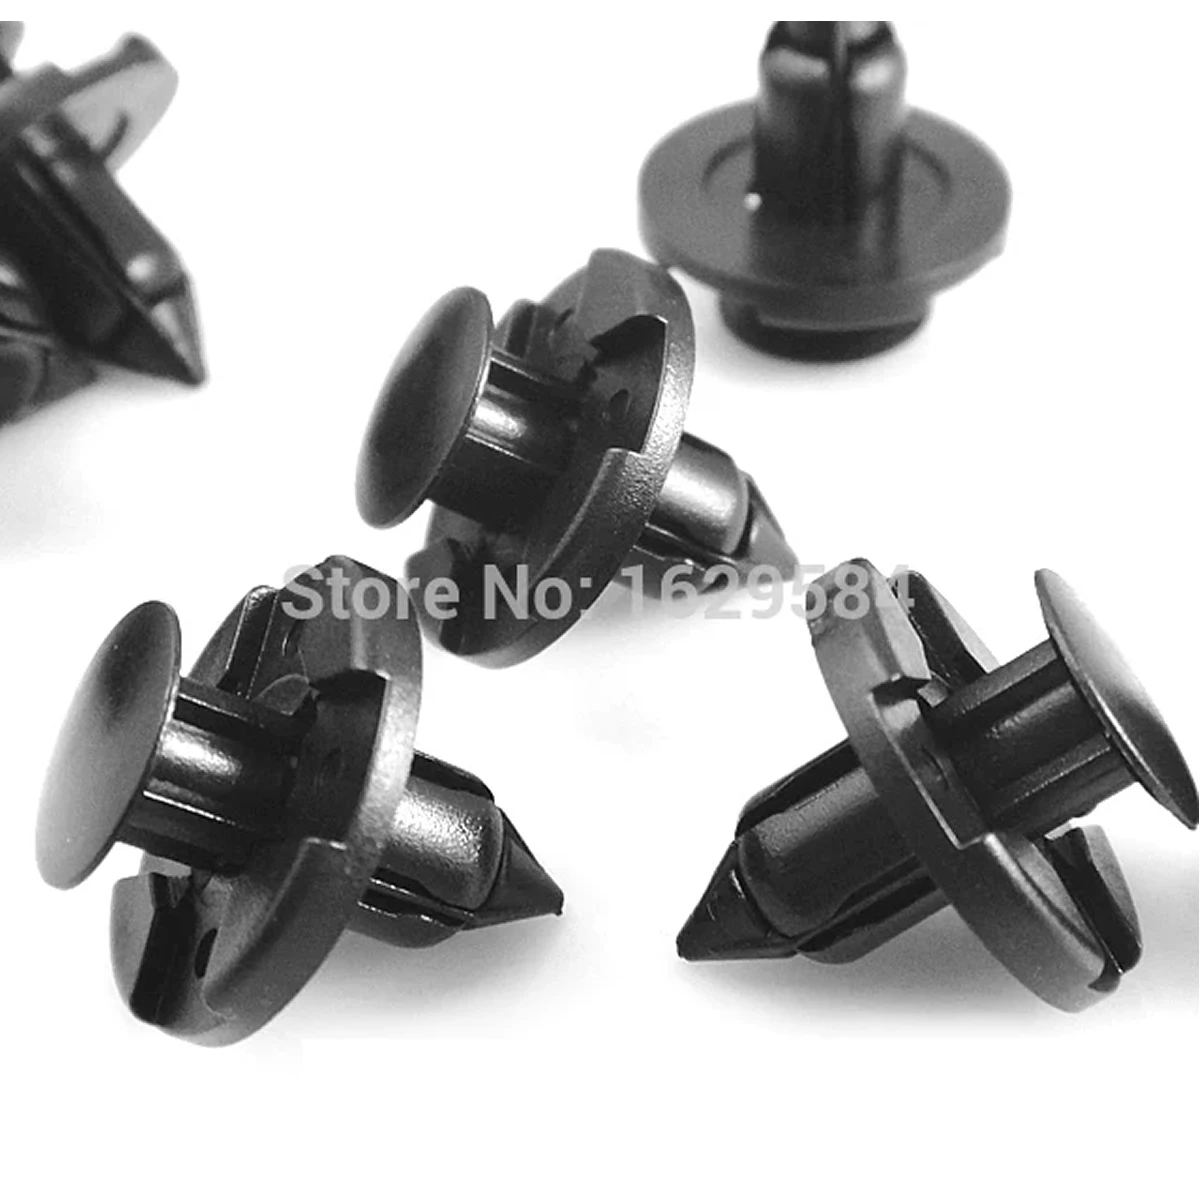 200 бр за COWL BUMBER & FENDER LINER PUSH TYPE CLIPS за nissan 01553-09321 Maxima 300ZX 90044-68320 MR328954 #01553-09